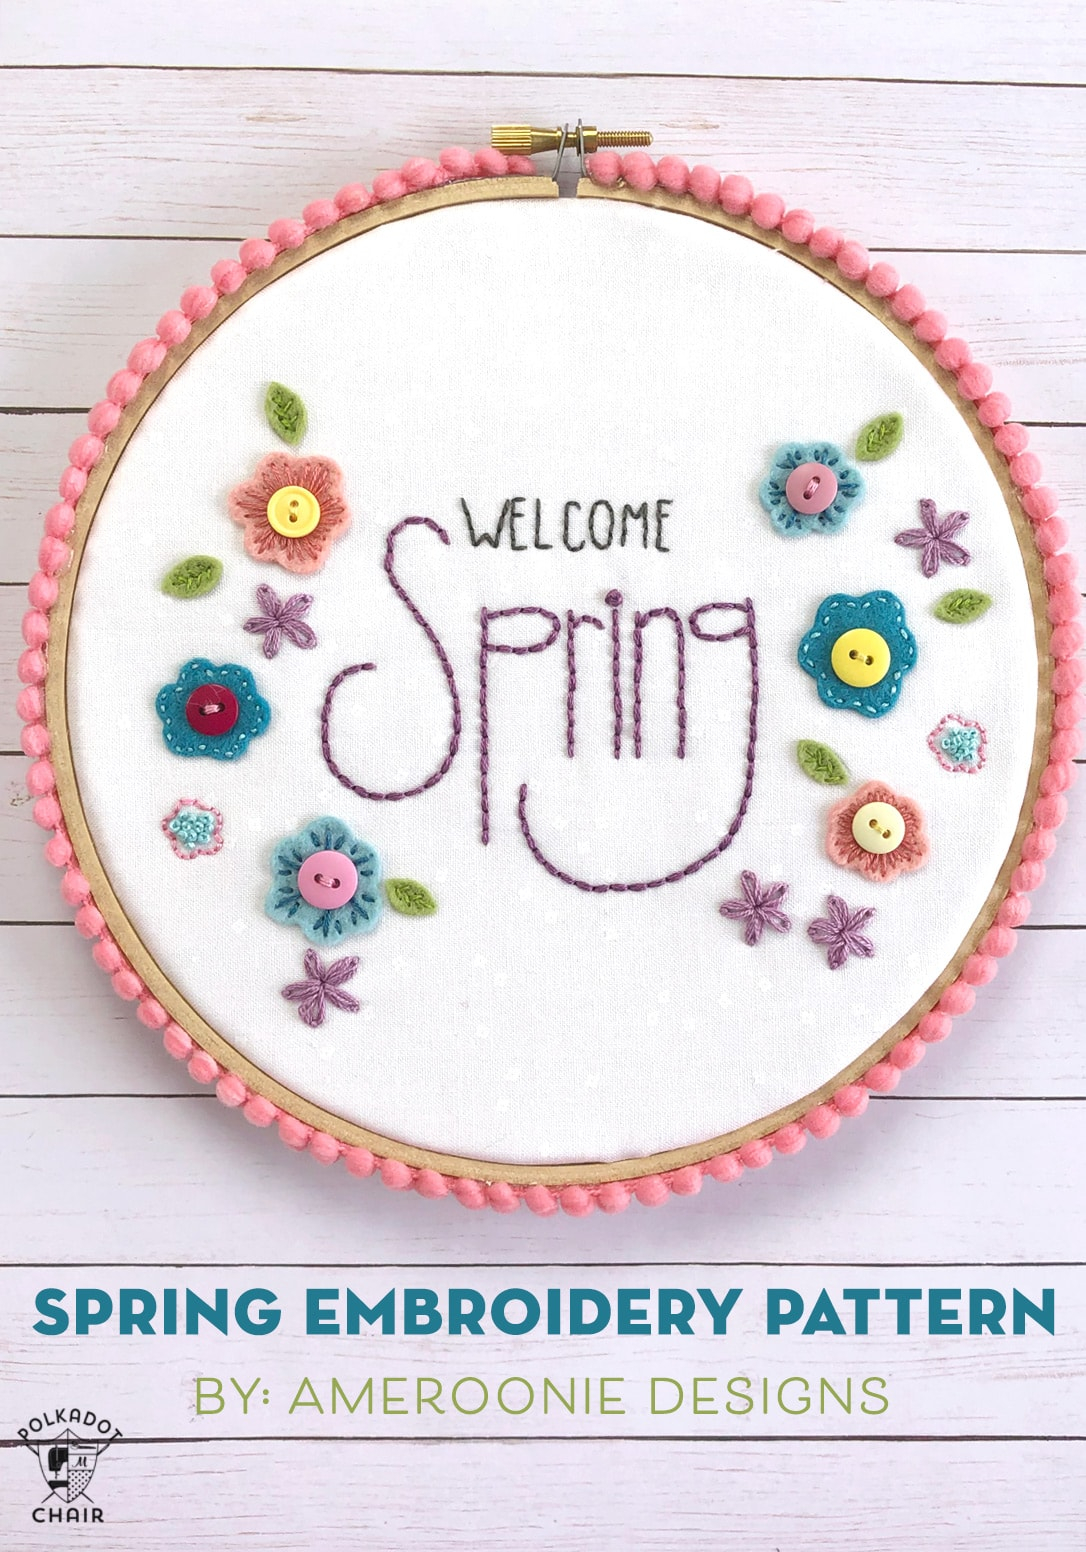 Embroidery Free Patterns Welcome Spring Free Hand Embroidery Pattern The Polka Dot Chair